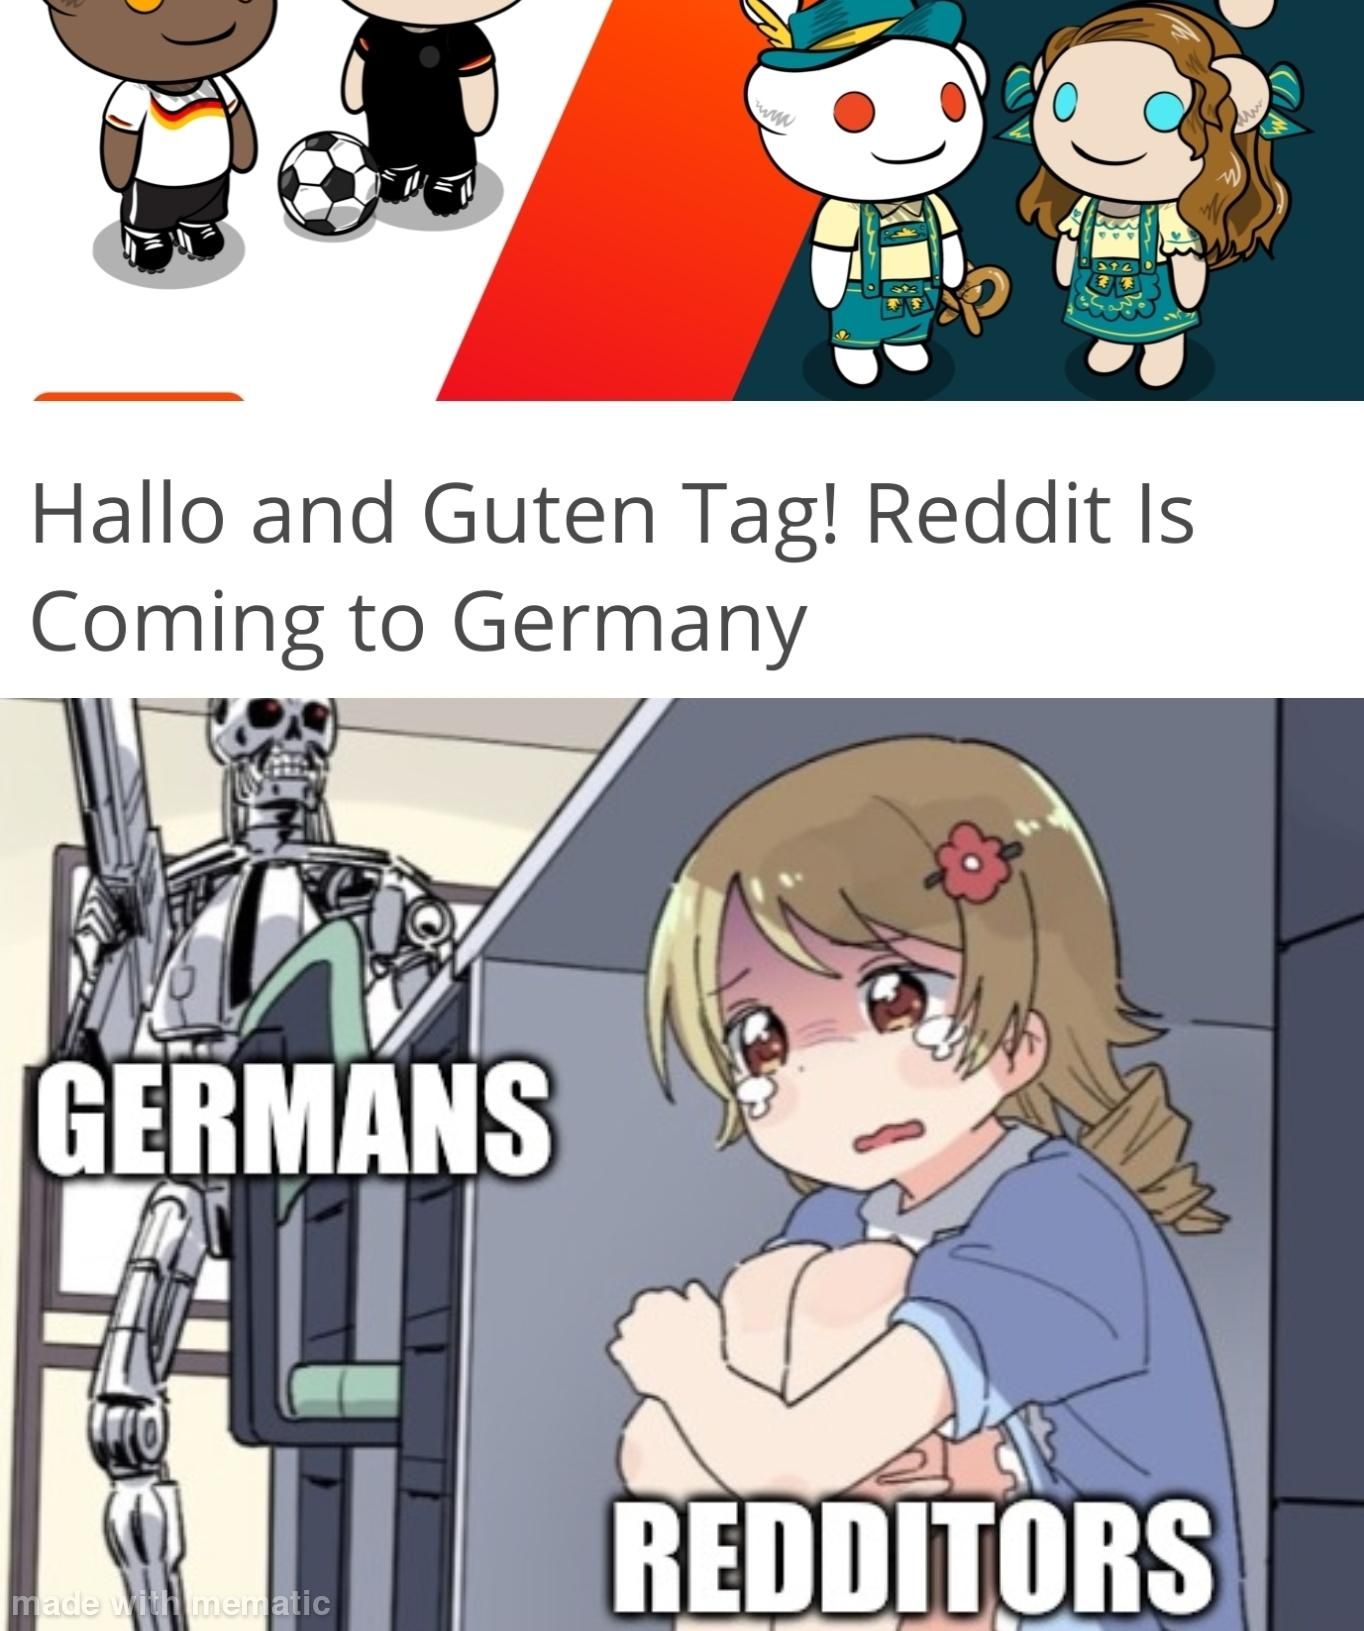 The Germans will return